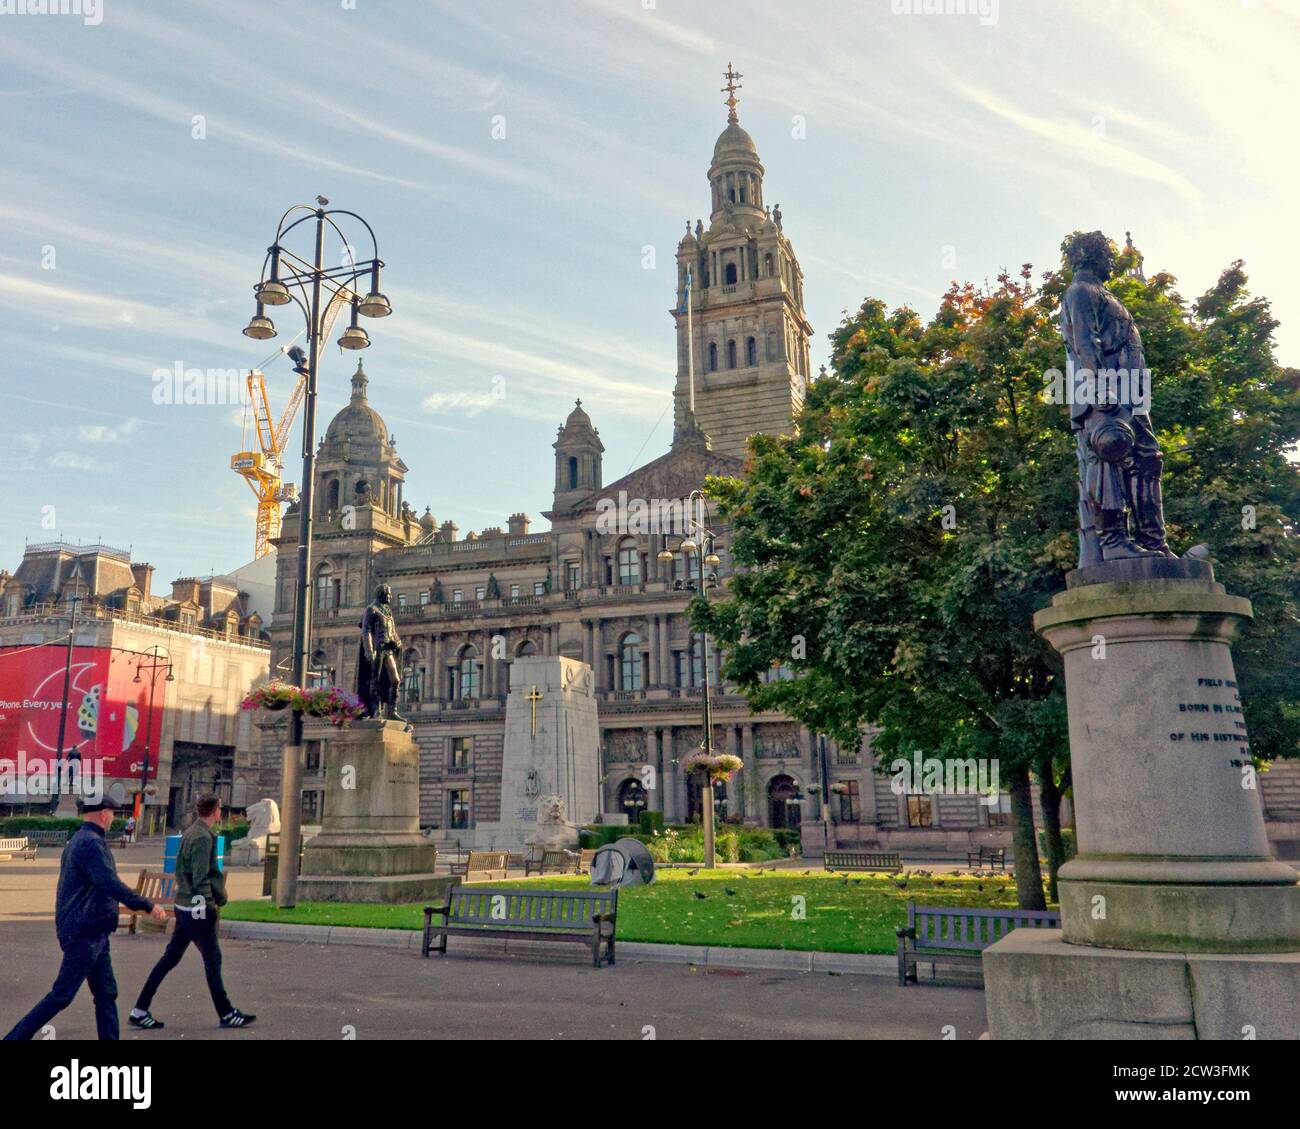 Glasgow, Scotland, UK, 27th September, 2020: George square with its cenotaph, statues of the great and good, manicured lawns and the architectural wonder of the city chambers had the ignominy of a homeless tent appear outside overnight to the amusement of locals and tourists alike. . Credit: Gerard Ferry/Alamy Live News Stock Photo